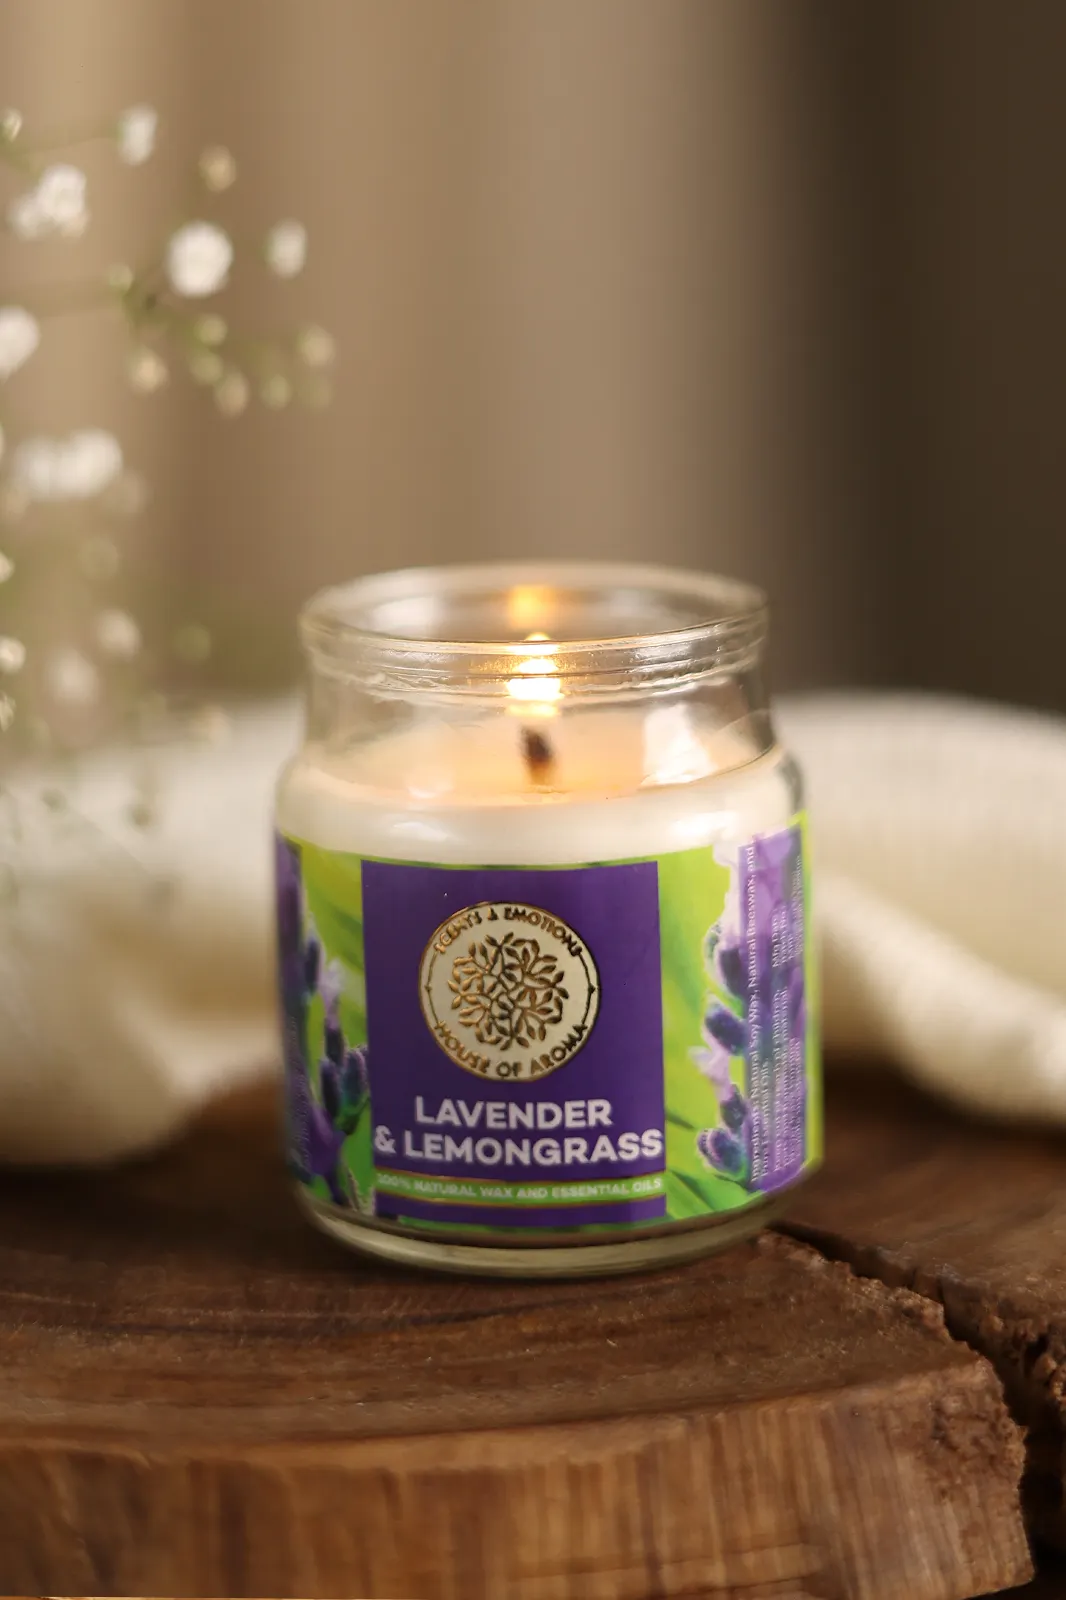 Lavender & Lemongrass Natural Scented Candle, lavender natural scented candle, lavender candles aromatherapy, lemongrass essential oil candle, House of Aroma